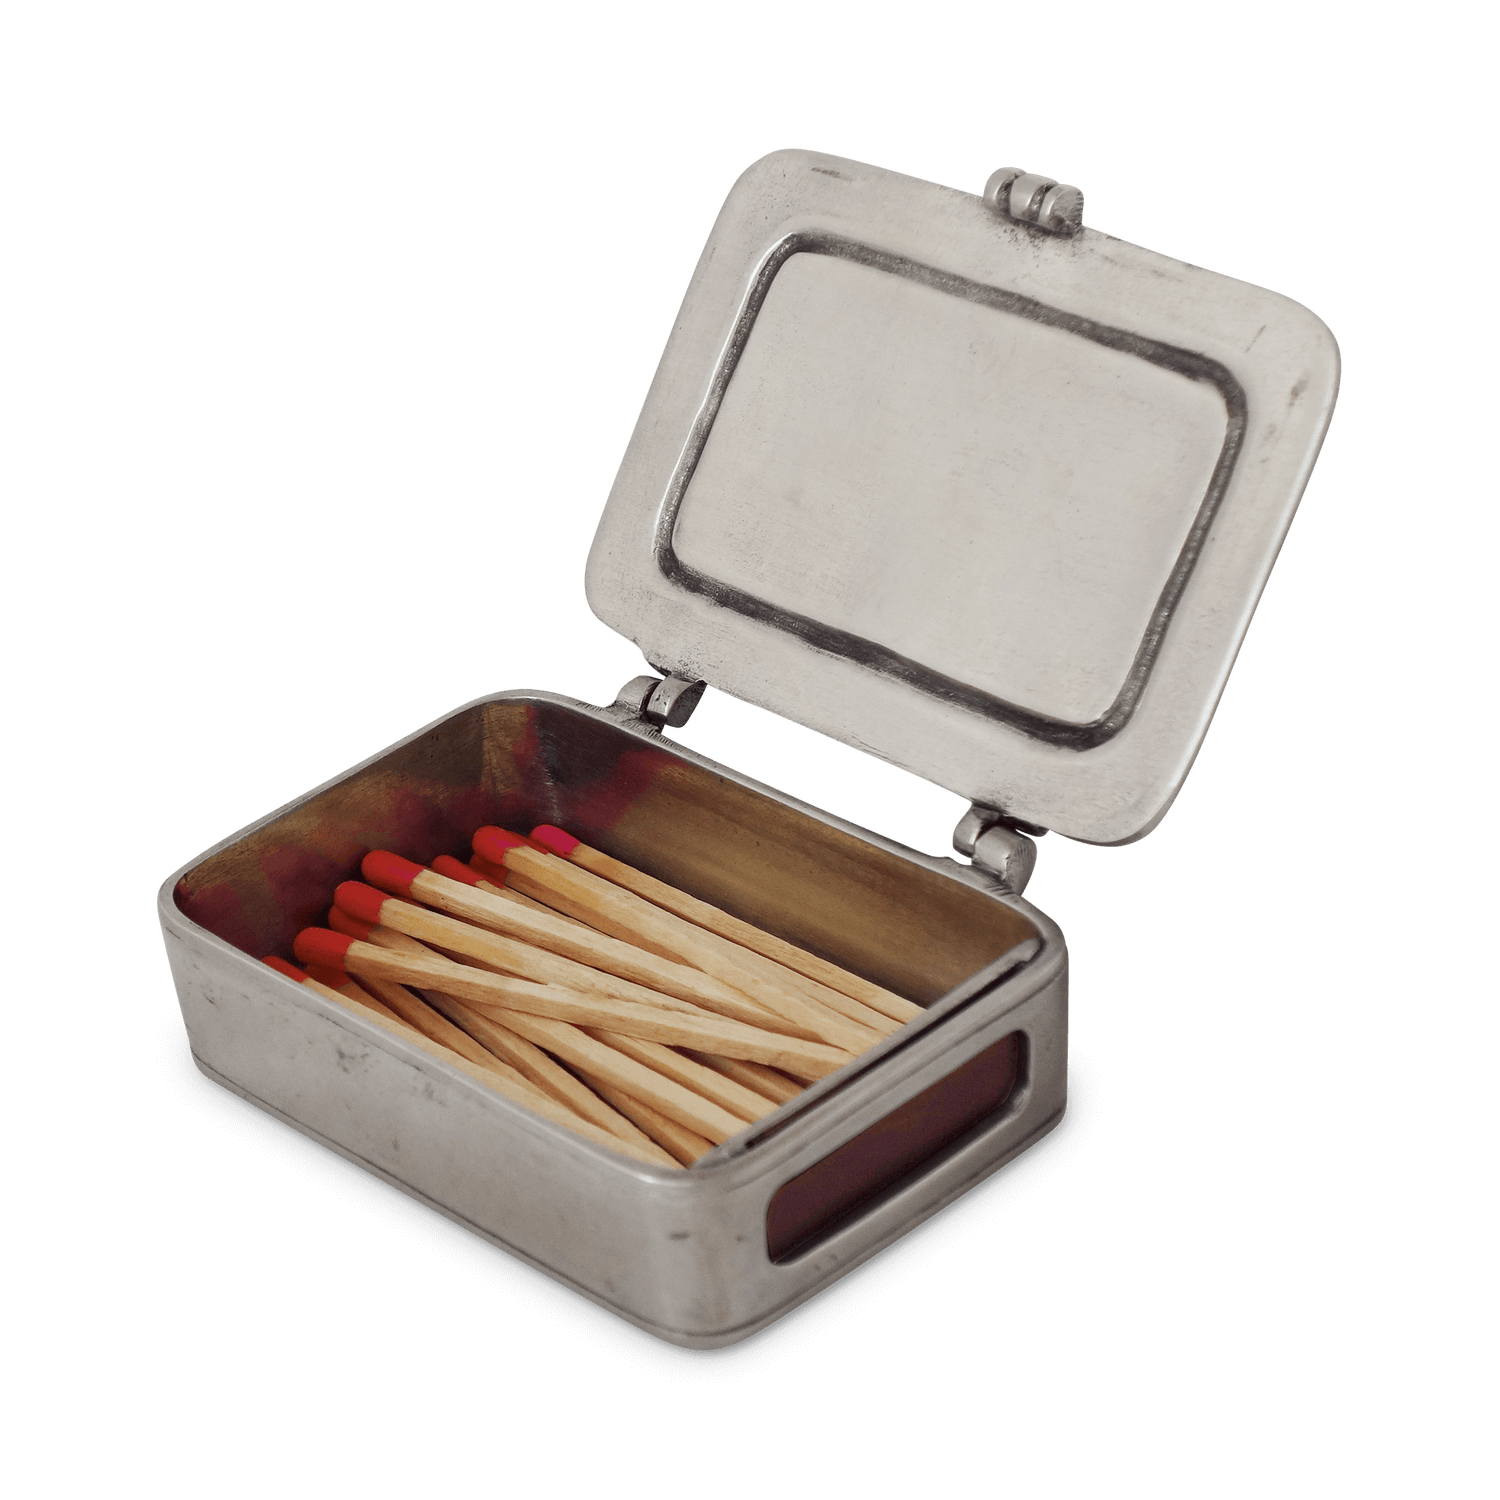 Match Box with Striker and Matches